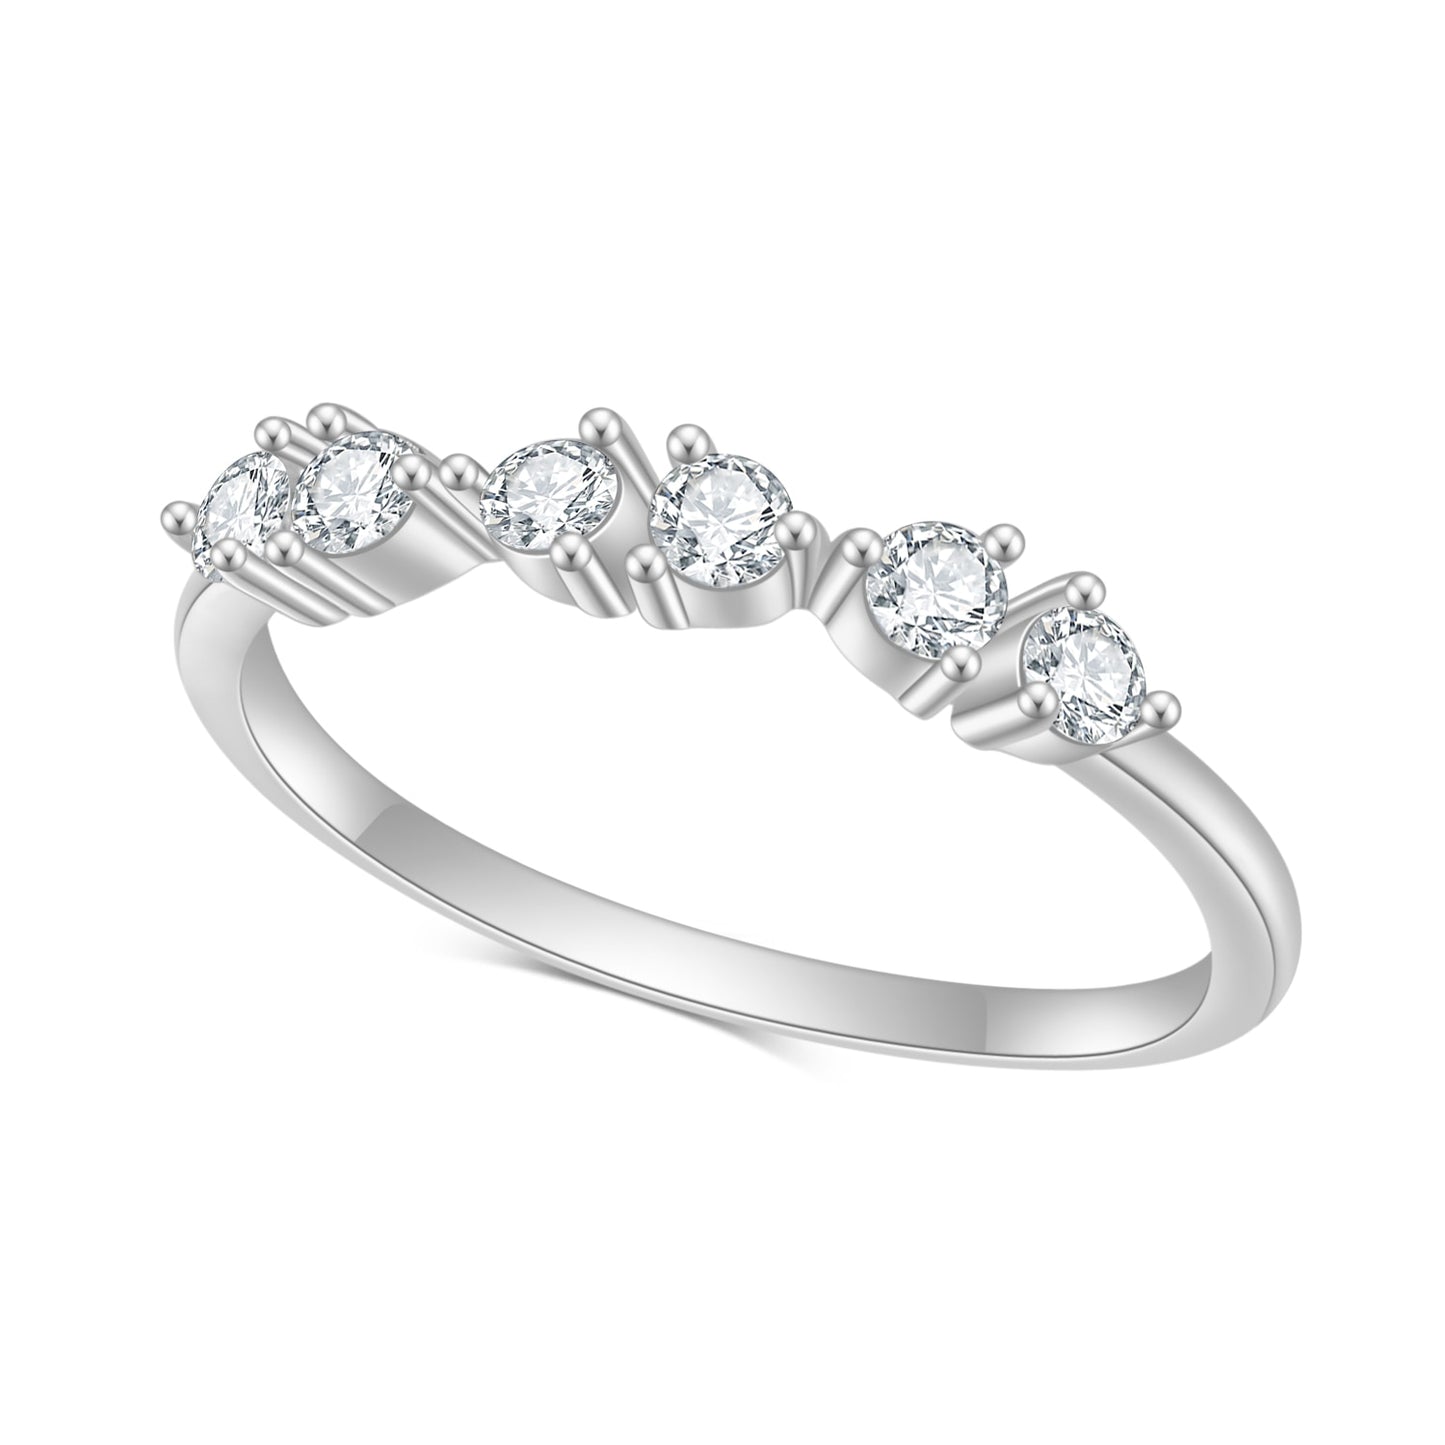 A silver wedding band with 3 pairs of 2 moissanites spaced horizontally on the ring slightly spaced apart.